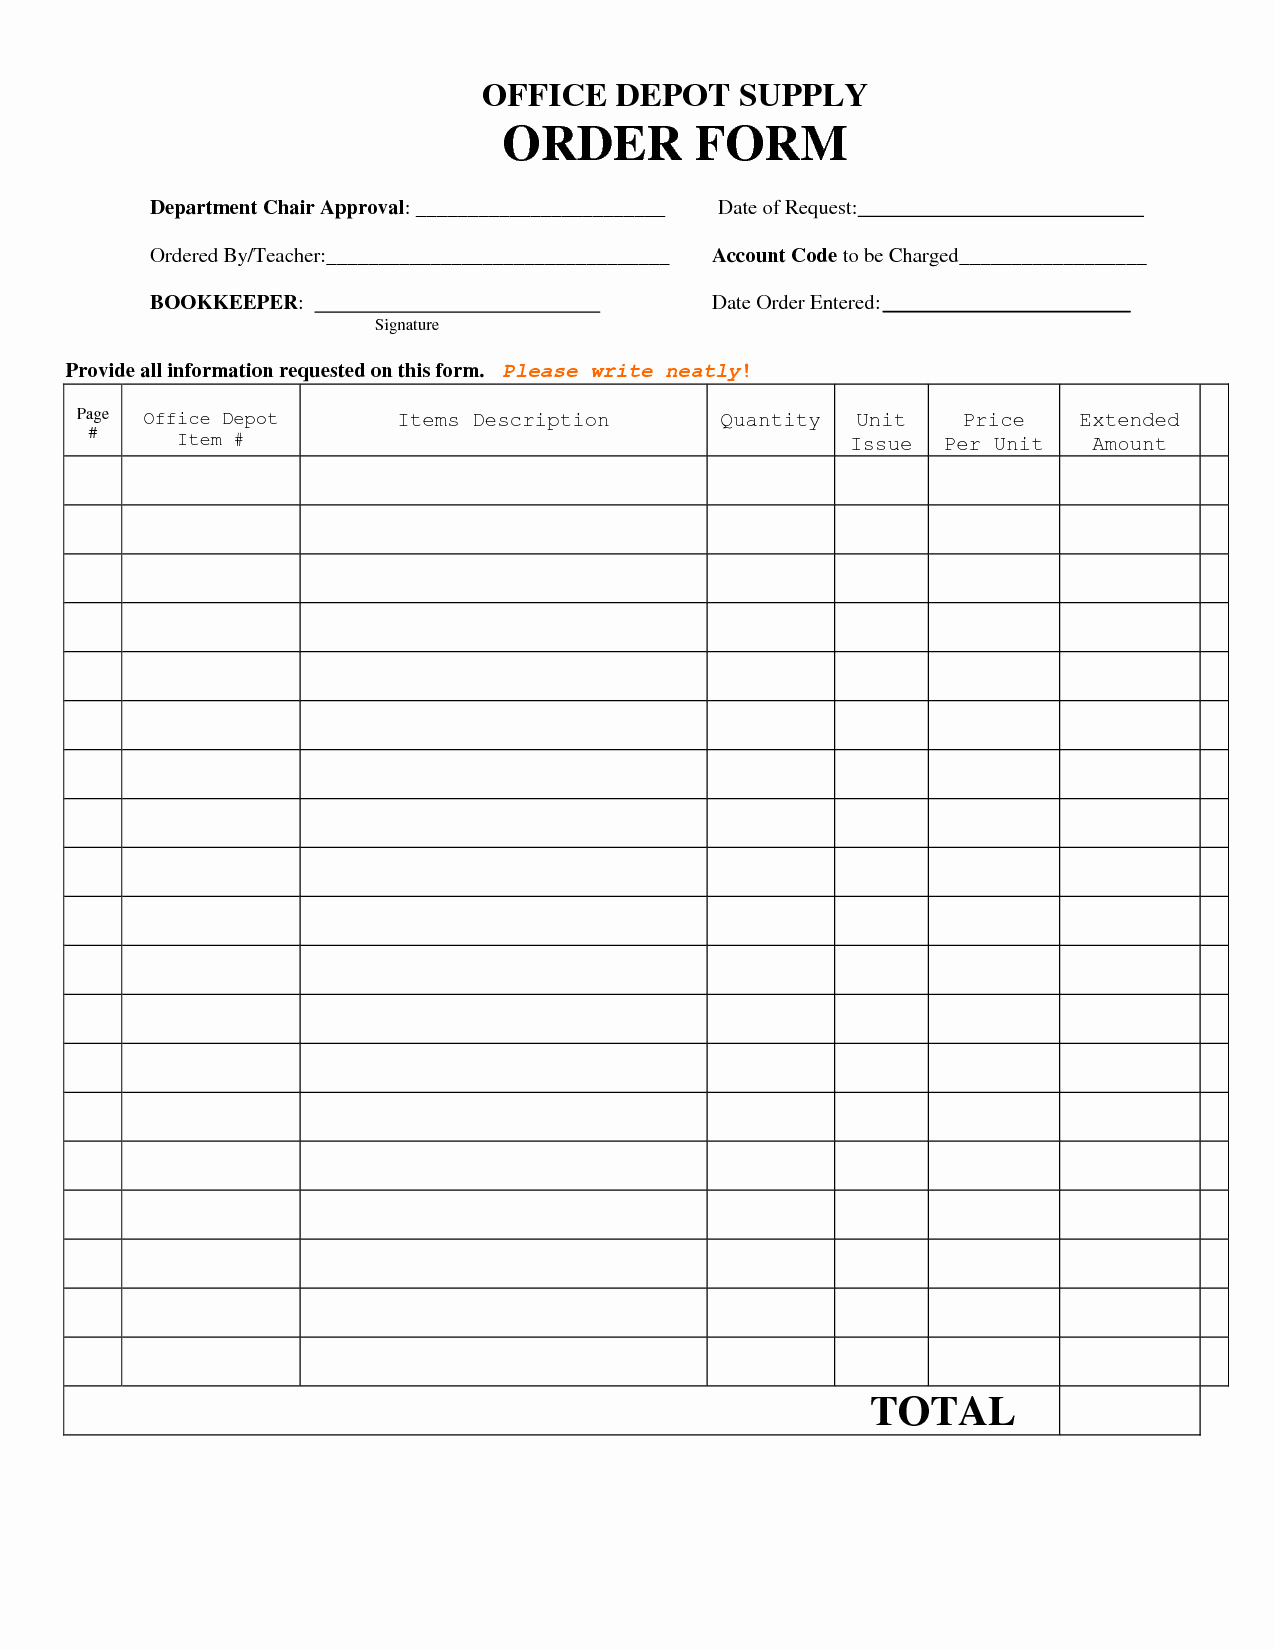 Office Supply List Template New Best S Of Standard Fice Supply order form Fice